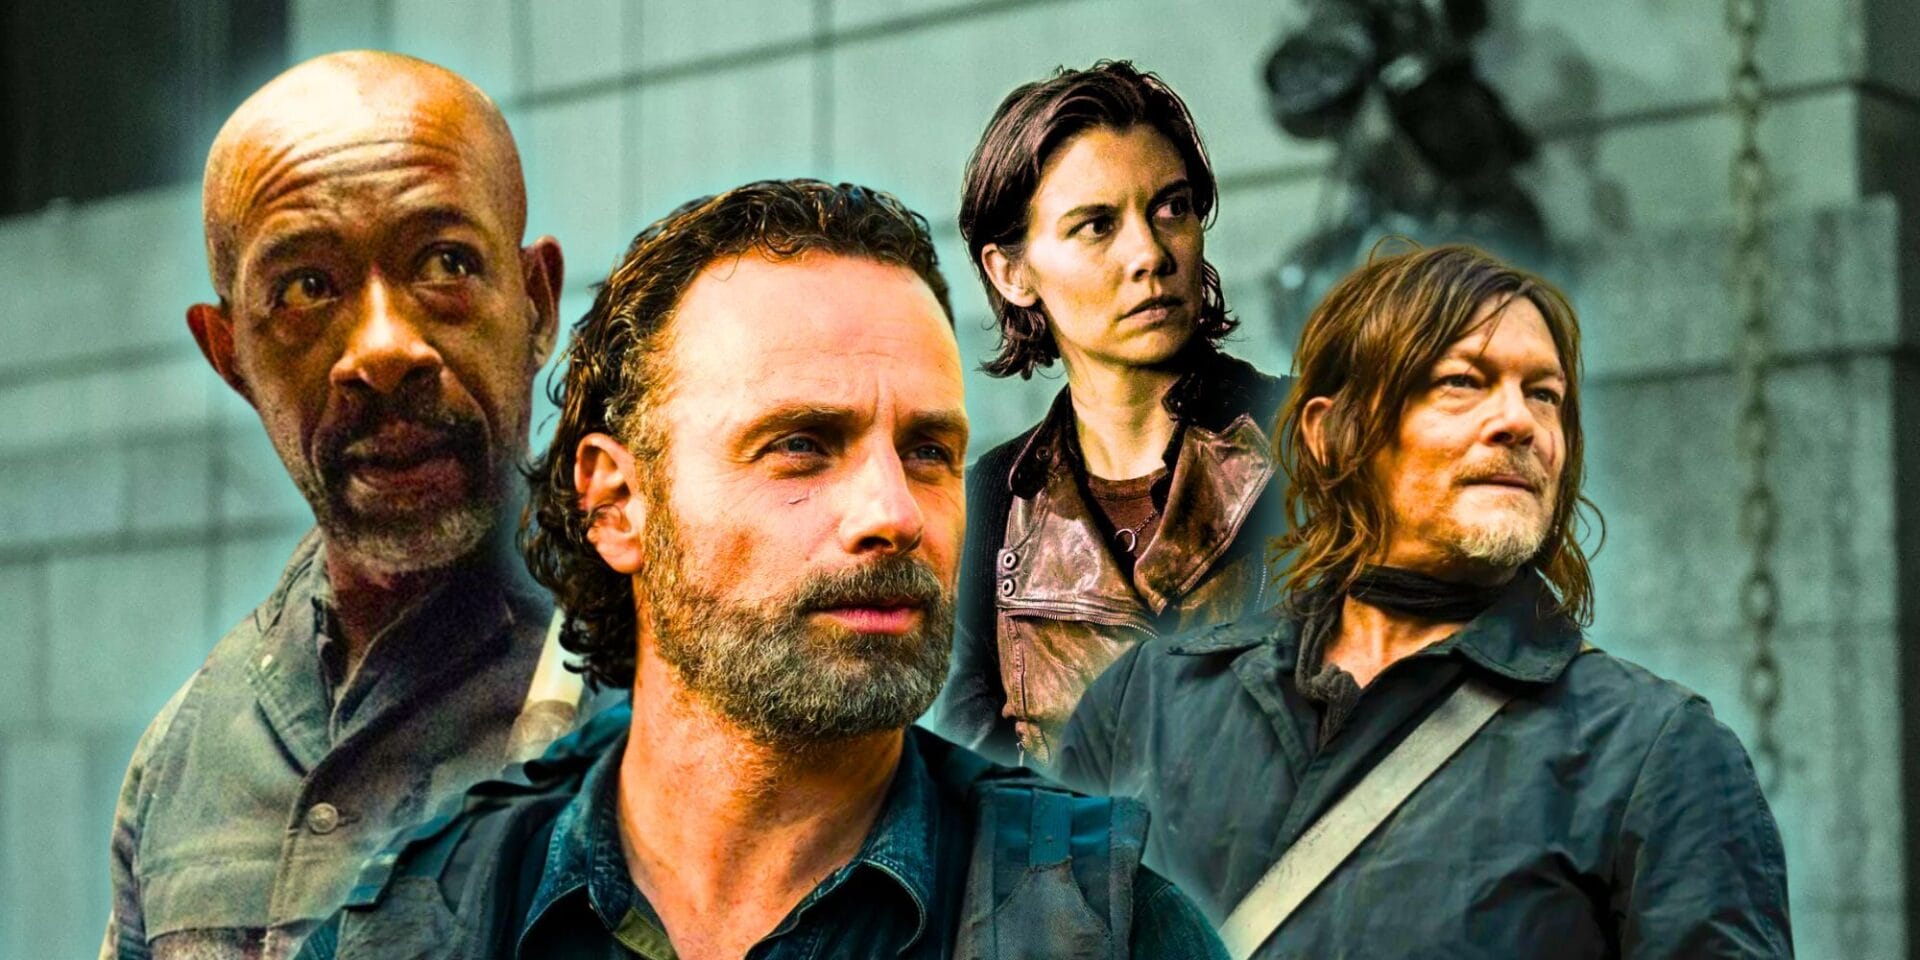 The Walking Dead Has Finally Achieved What It Planned 3 Years Ago